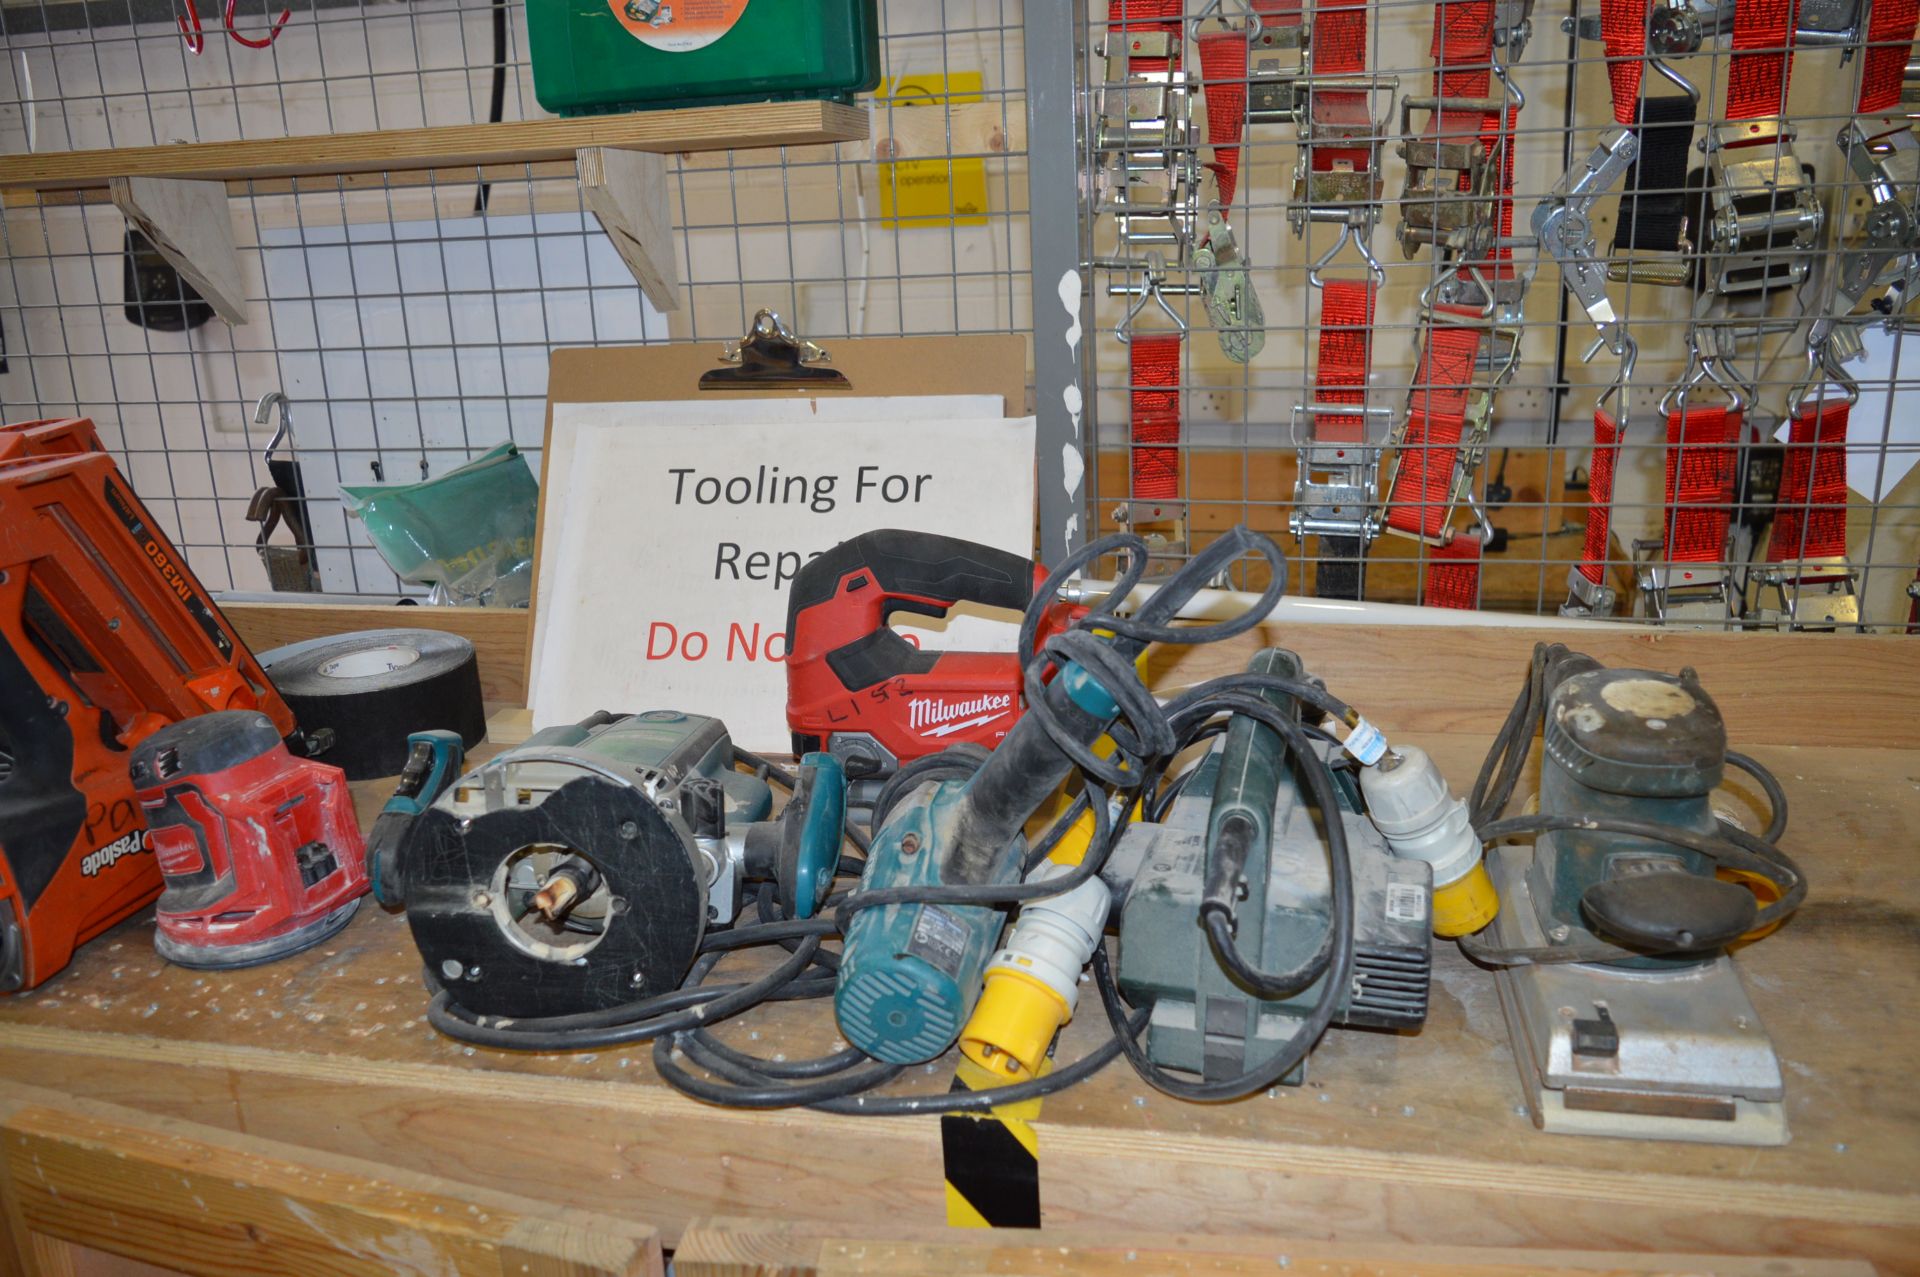 Quantity of Paslode, nail guns, 110v power tools and battery tools - all require attention (as - Image 2 of 2